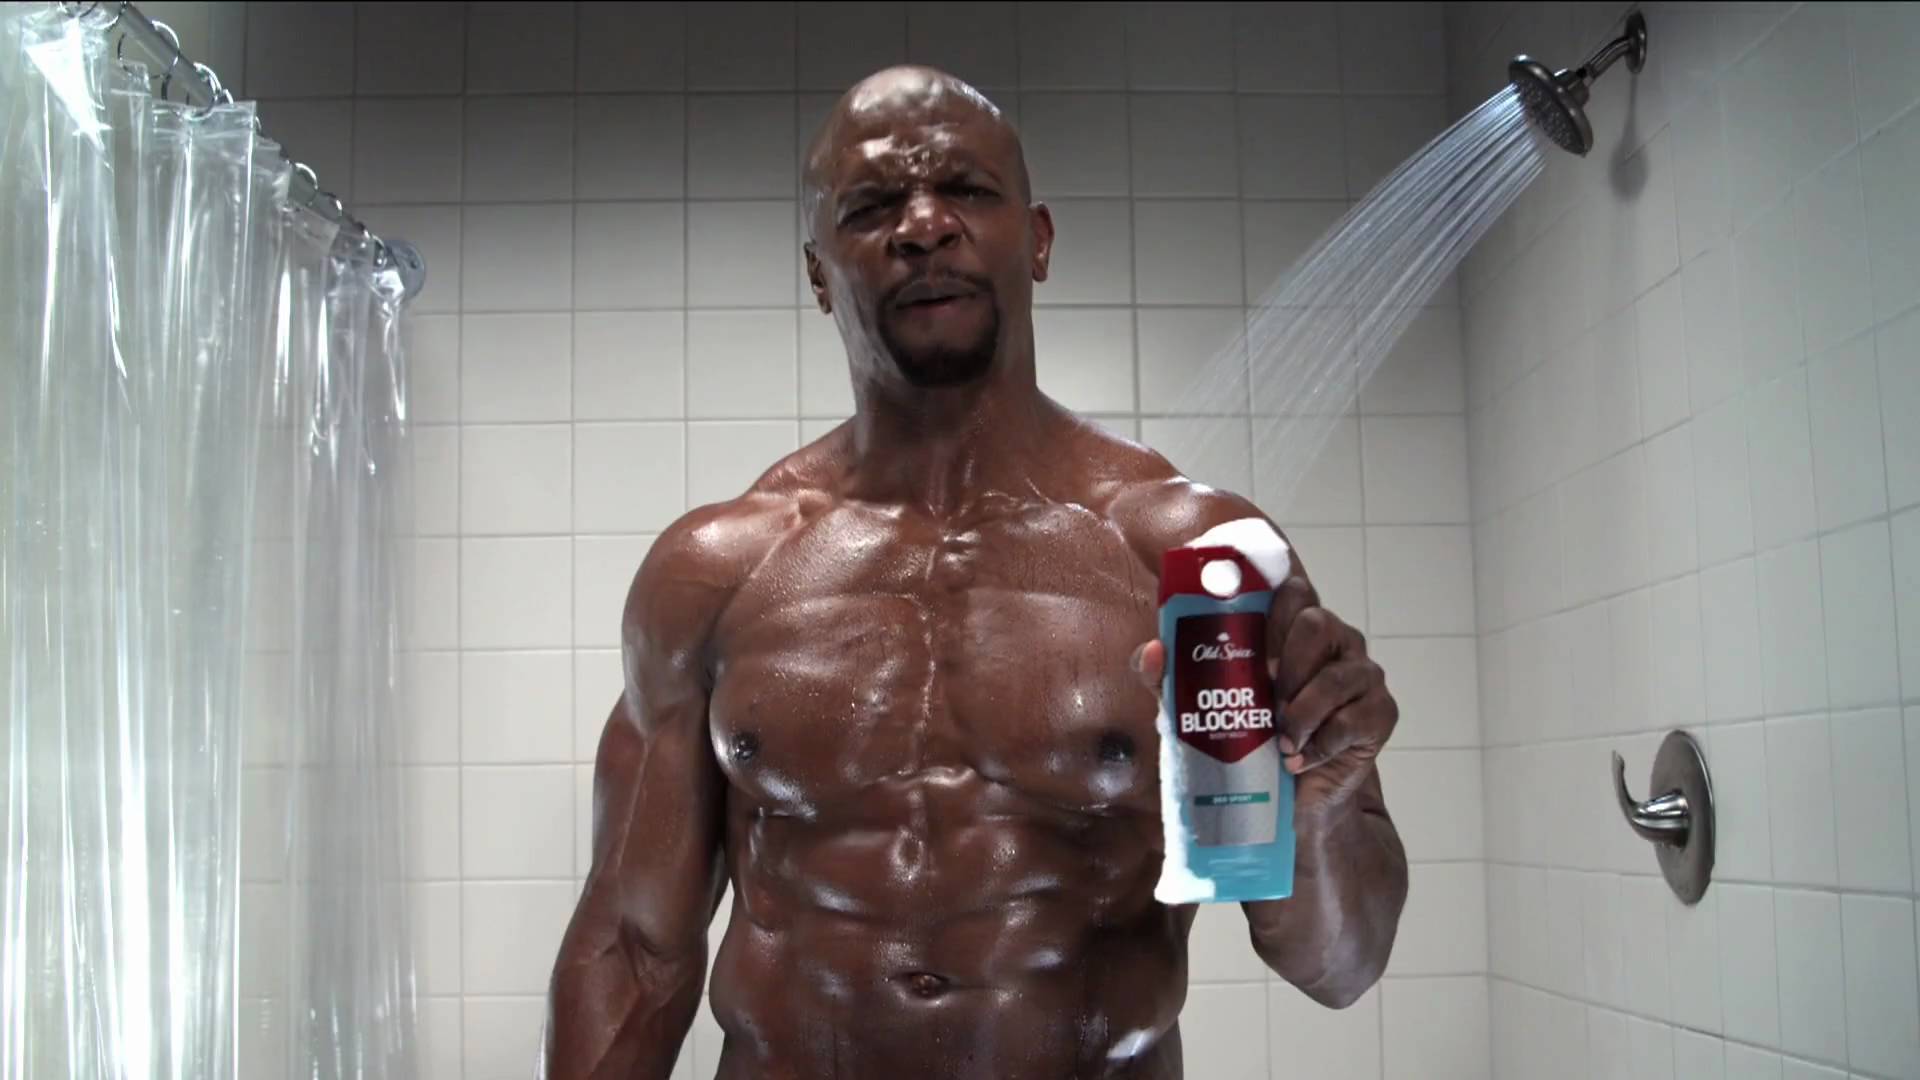 Terry Crews' unfortunate and uneven insertions, bodybuilding